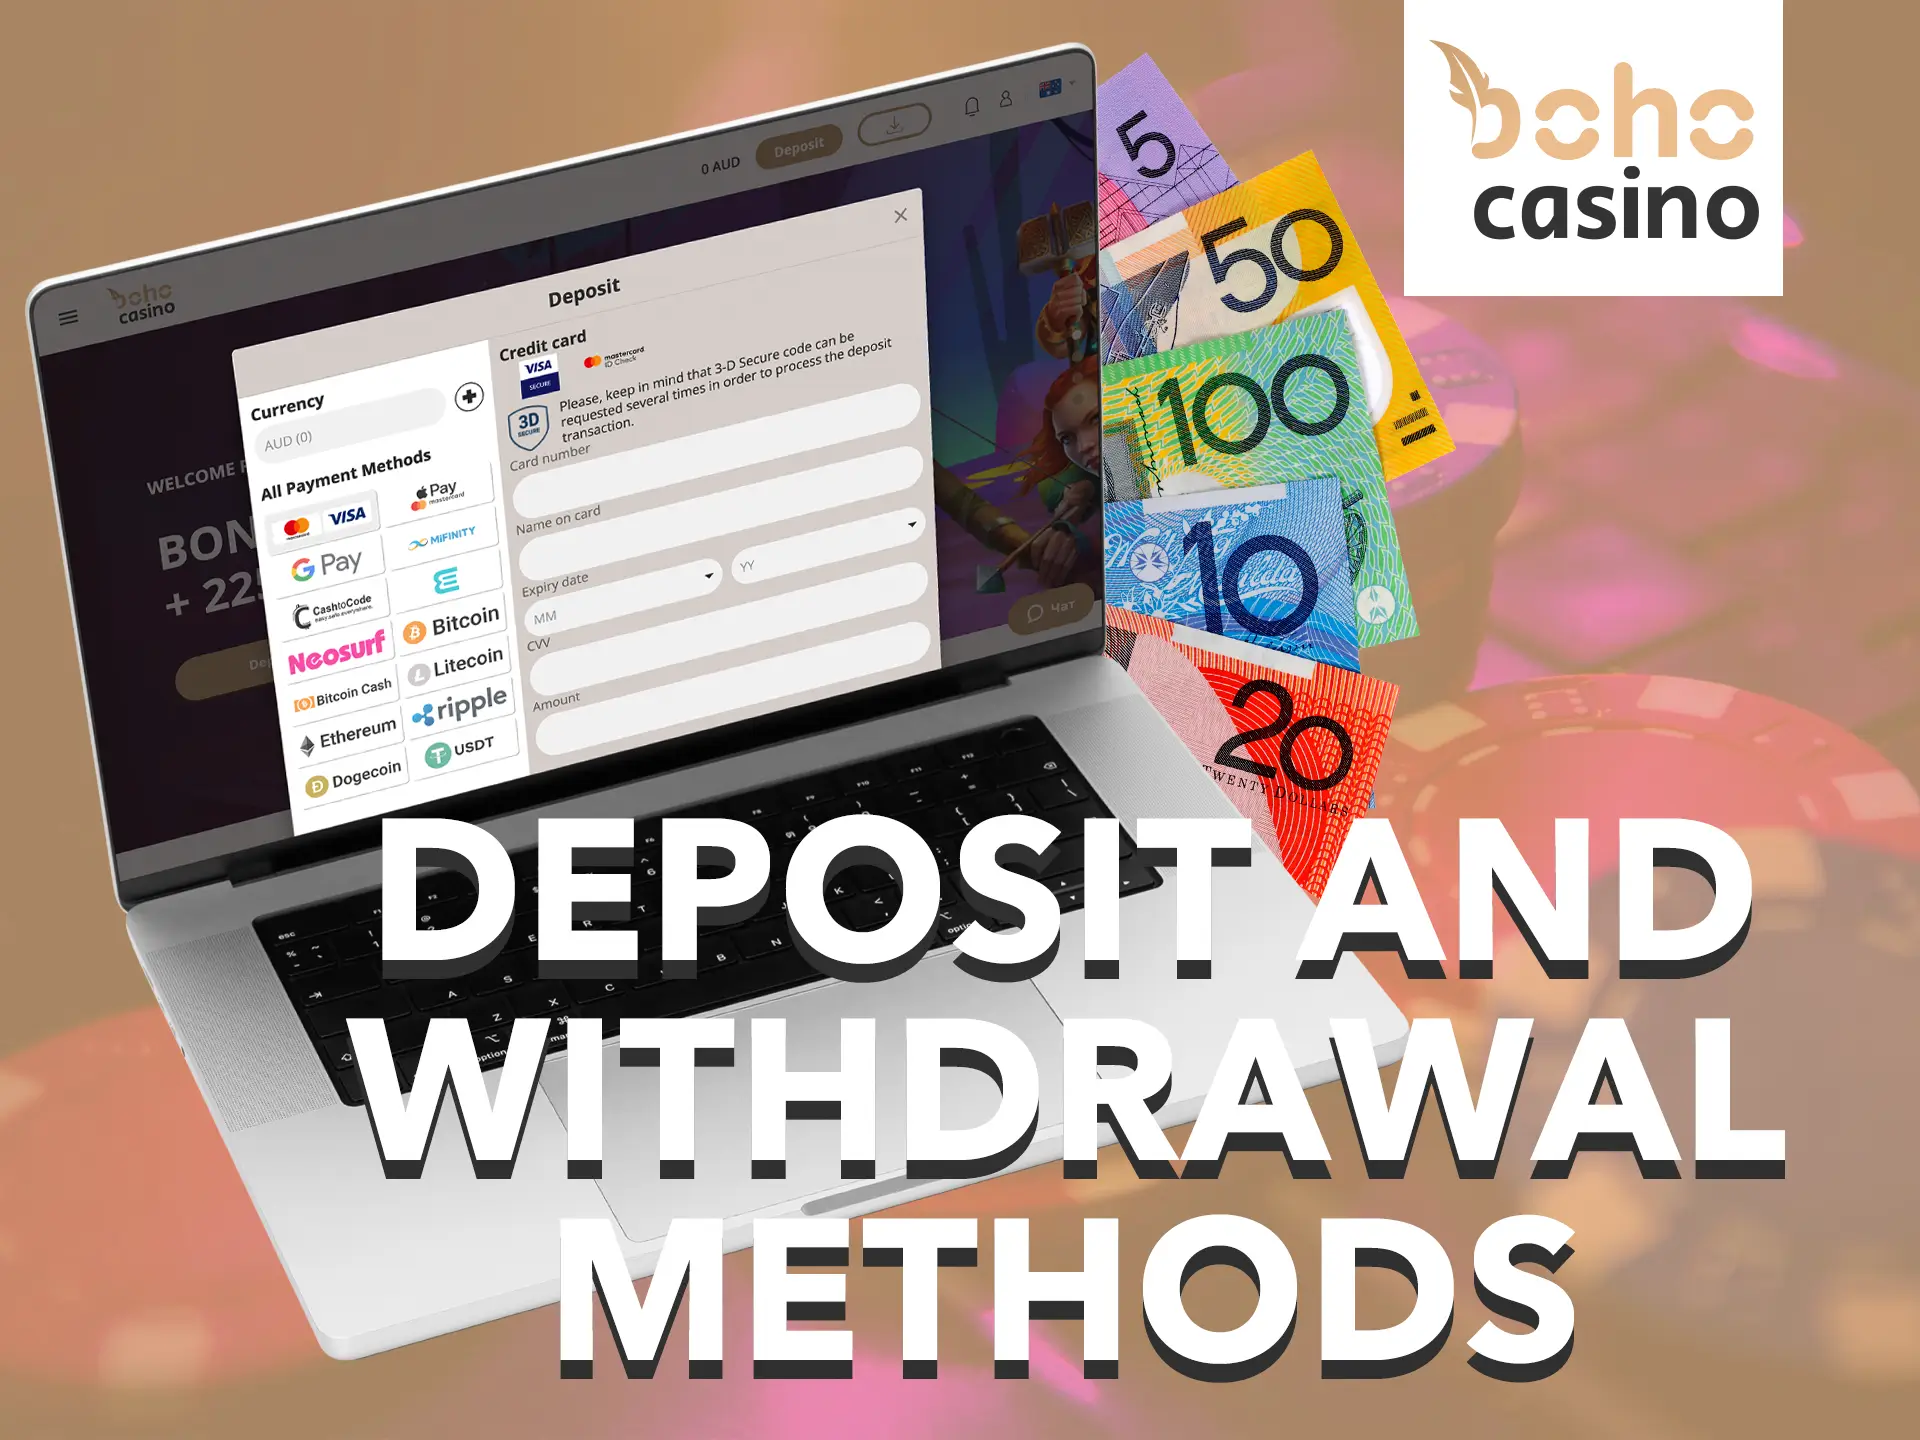 Use only necessary and convenient for you deposit and withdrawal methods at Boho Casino.